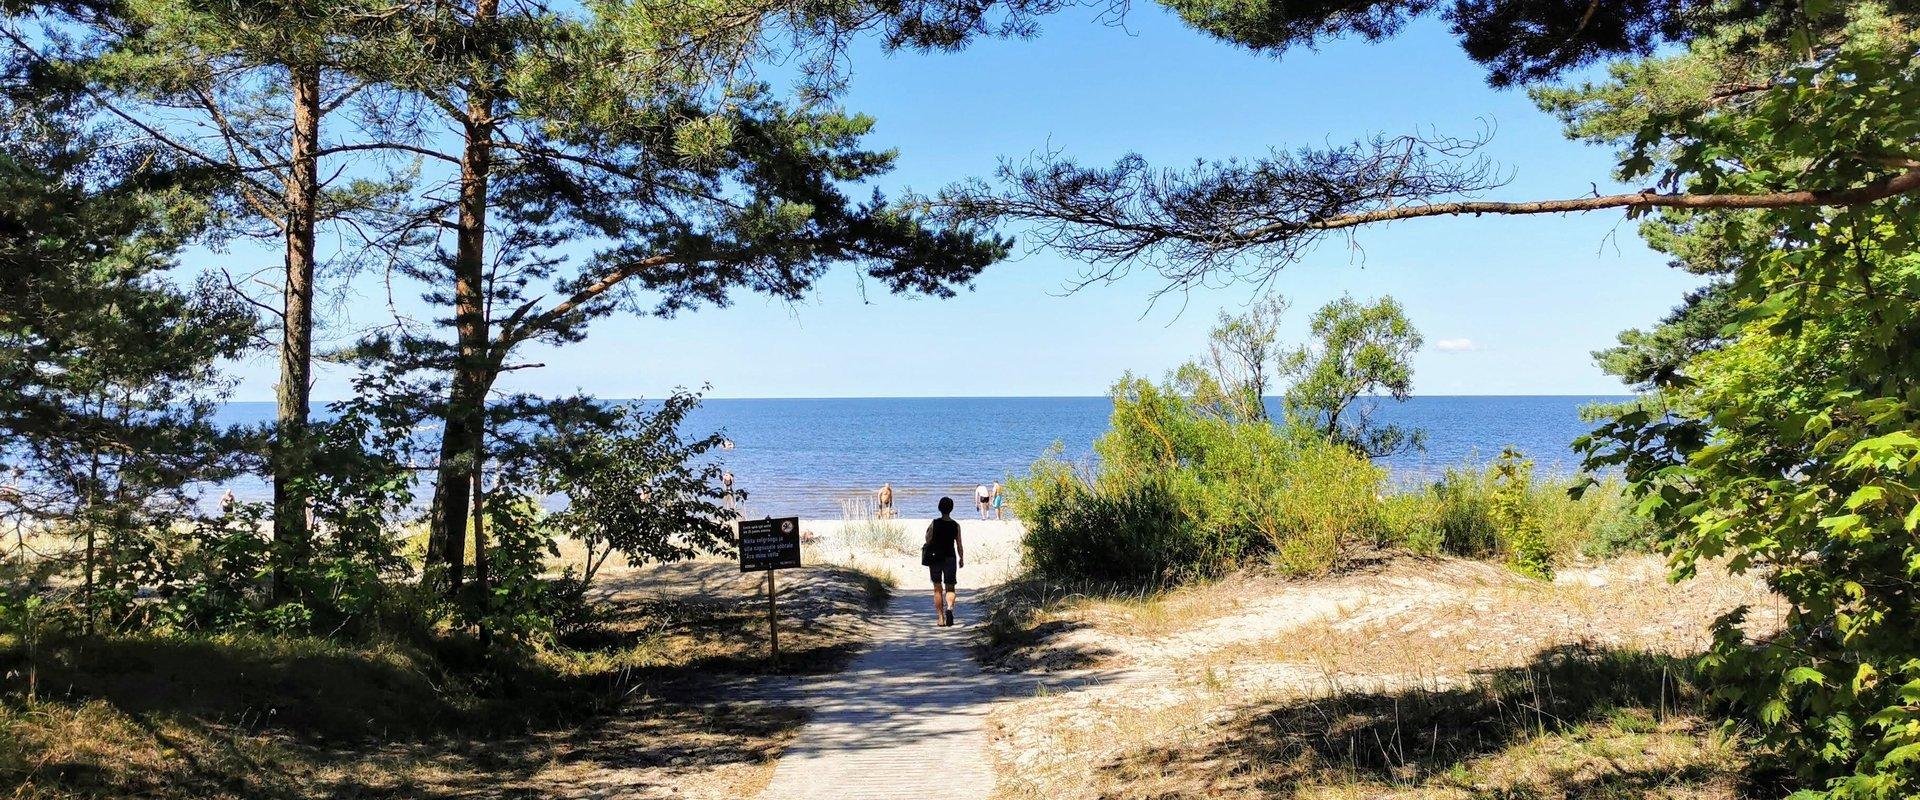 A beautiful natural beach with shores lined with lovely pebbles and a pine forest. The seaside campsite with a fenced garden has been popular for deca